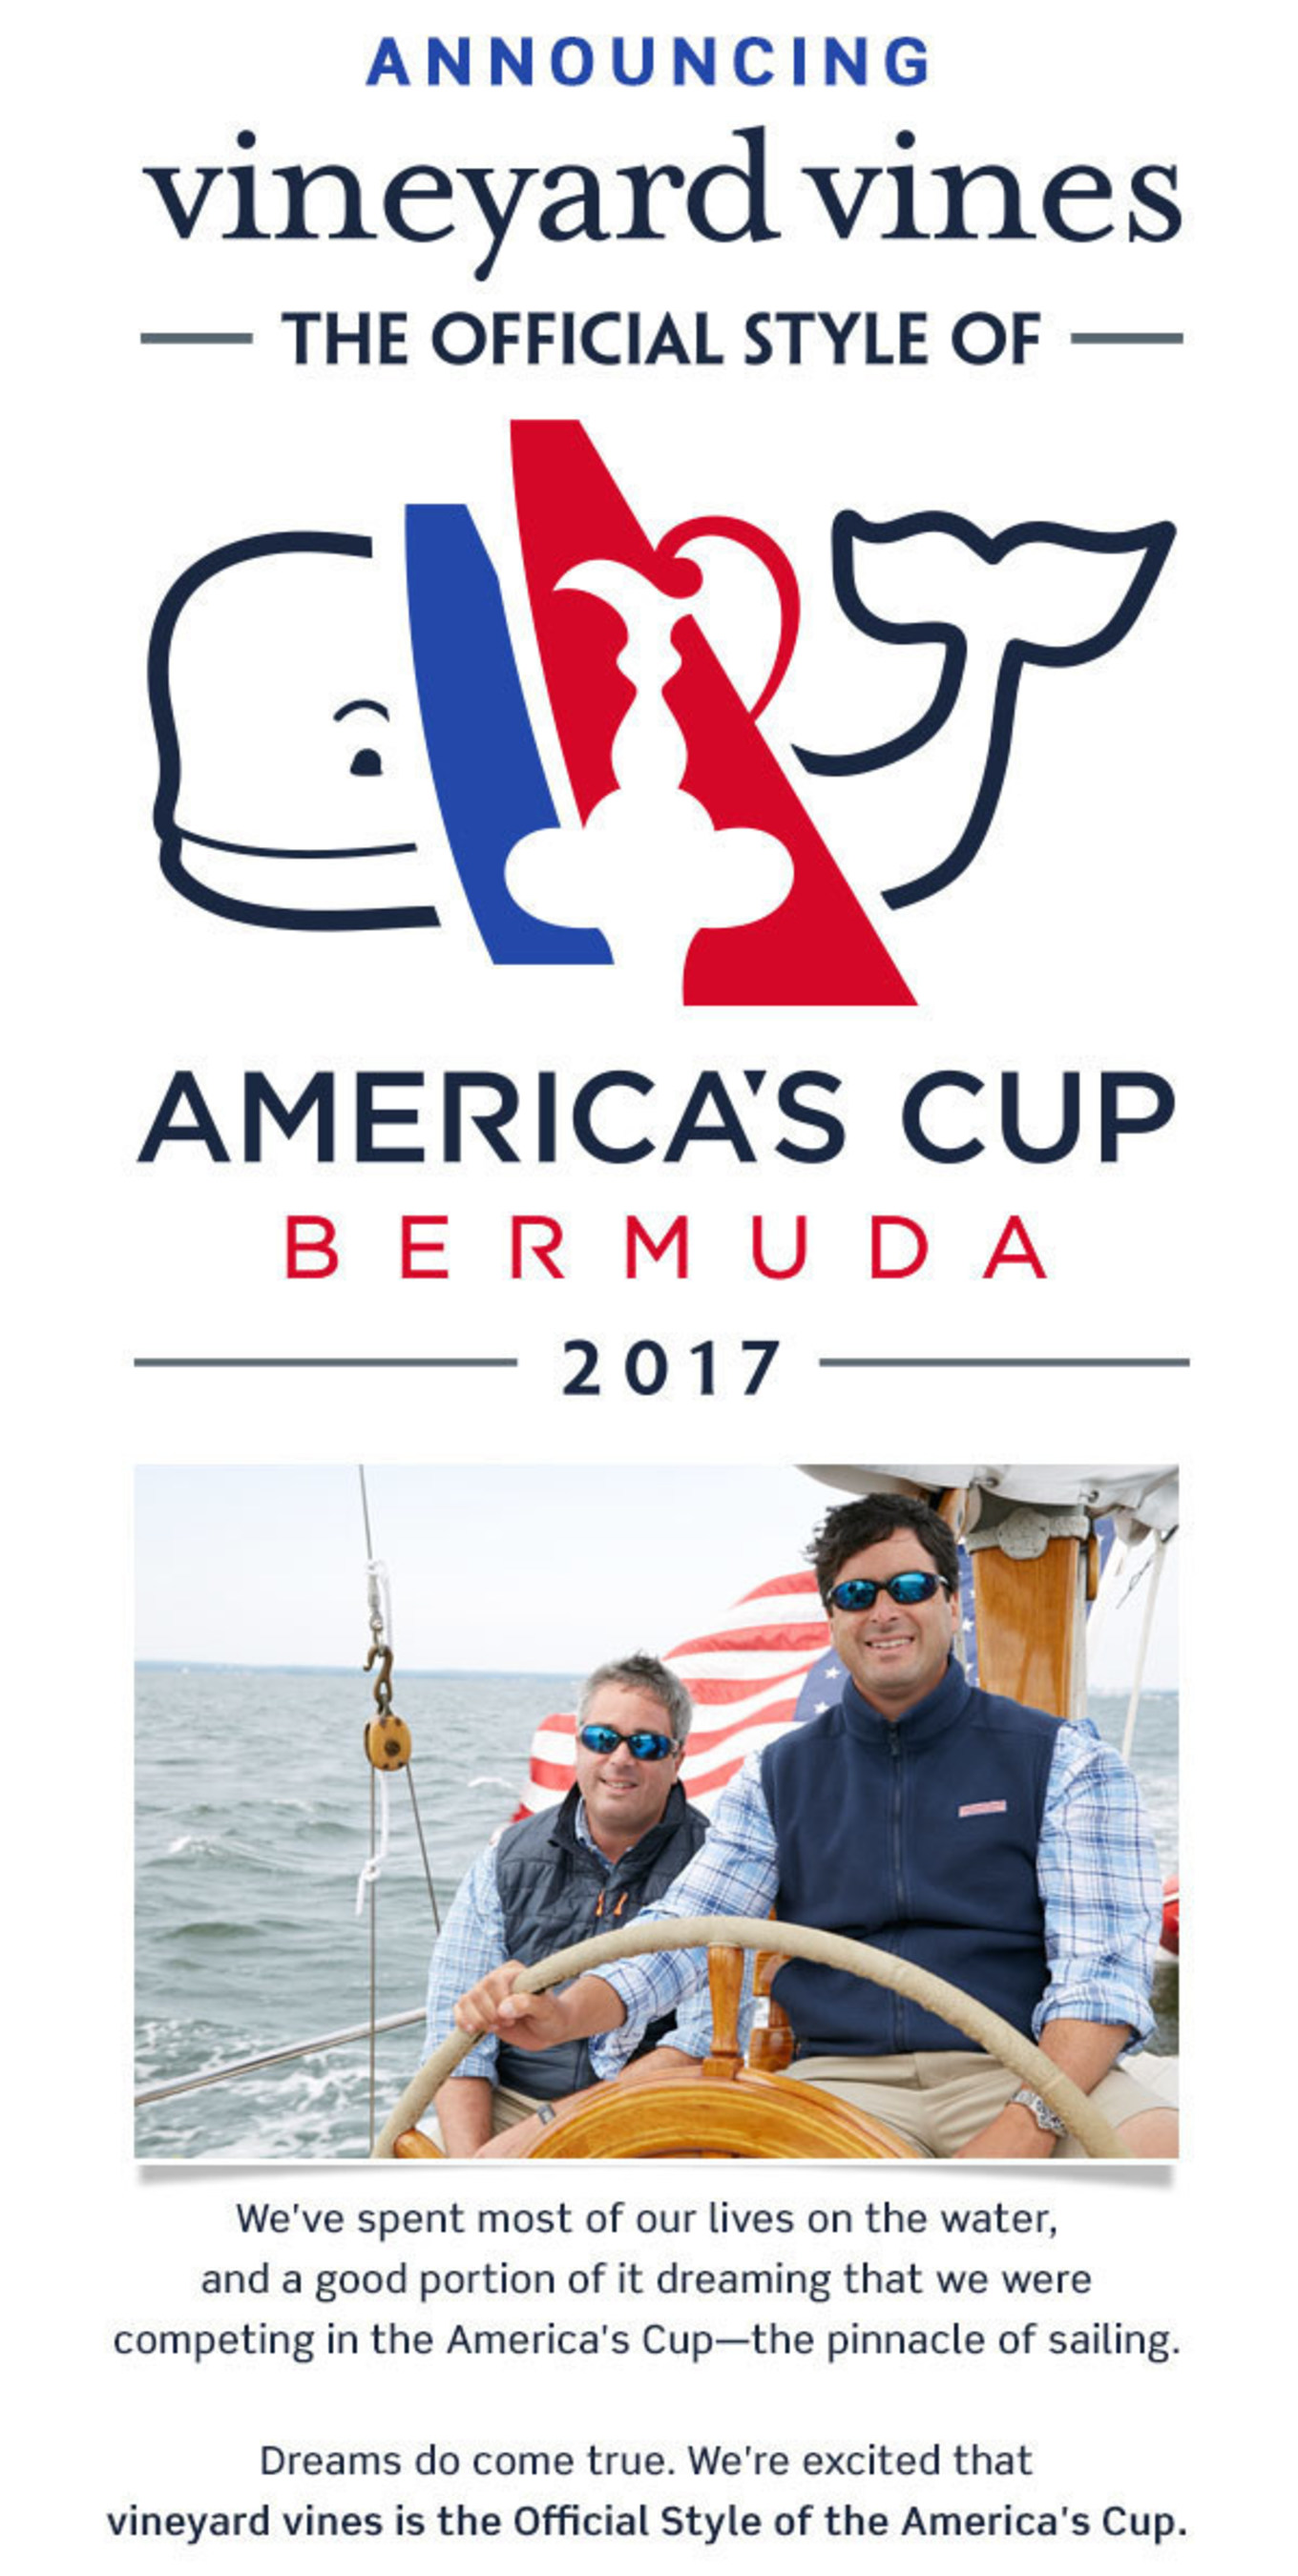 vineyard vines(R) Announced as the Official Style of the 35th America's Cup